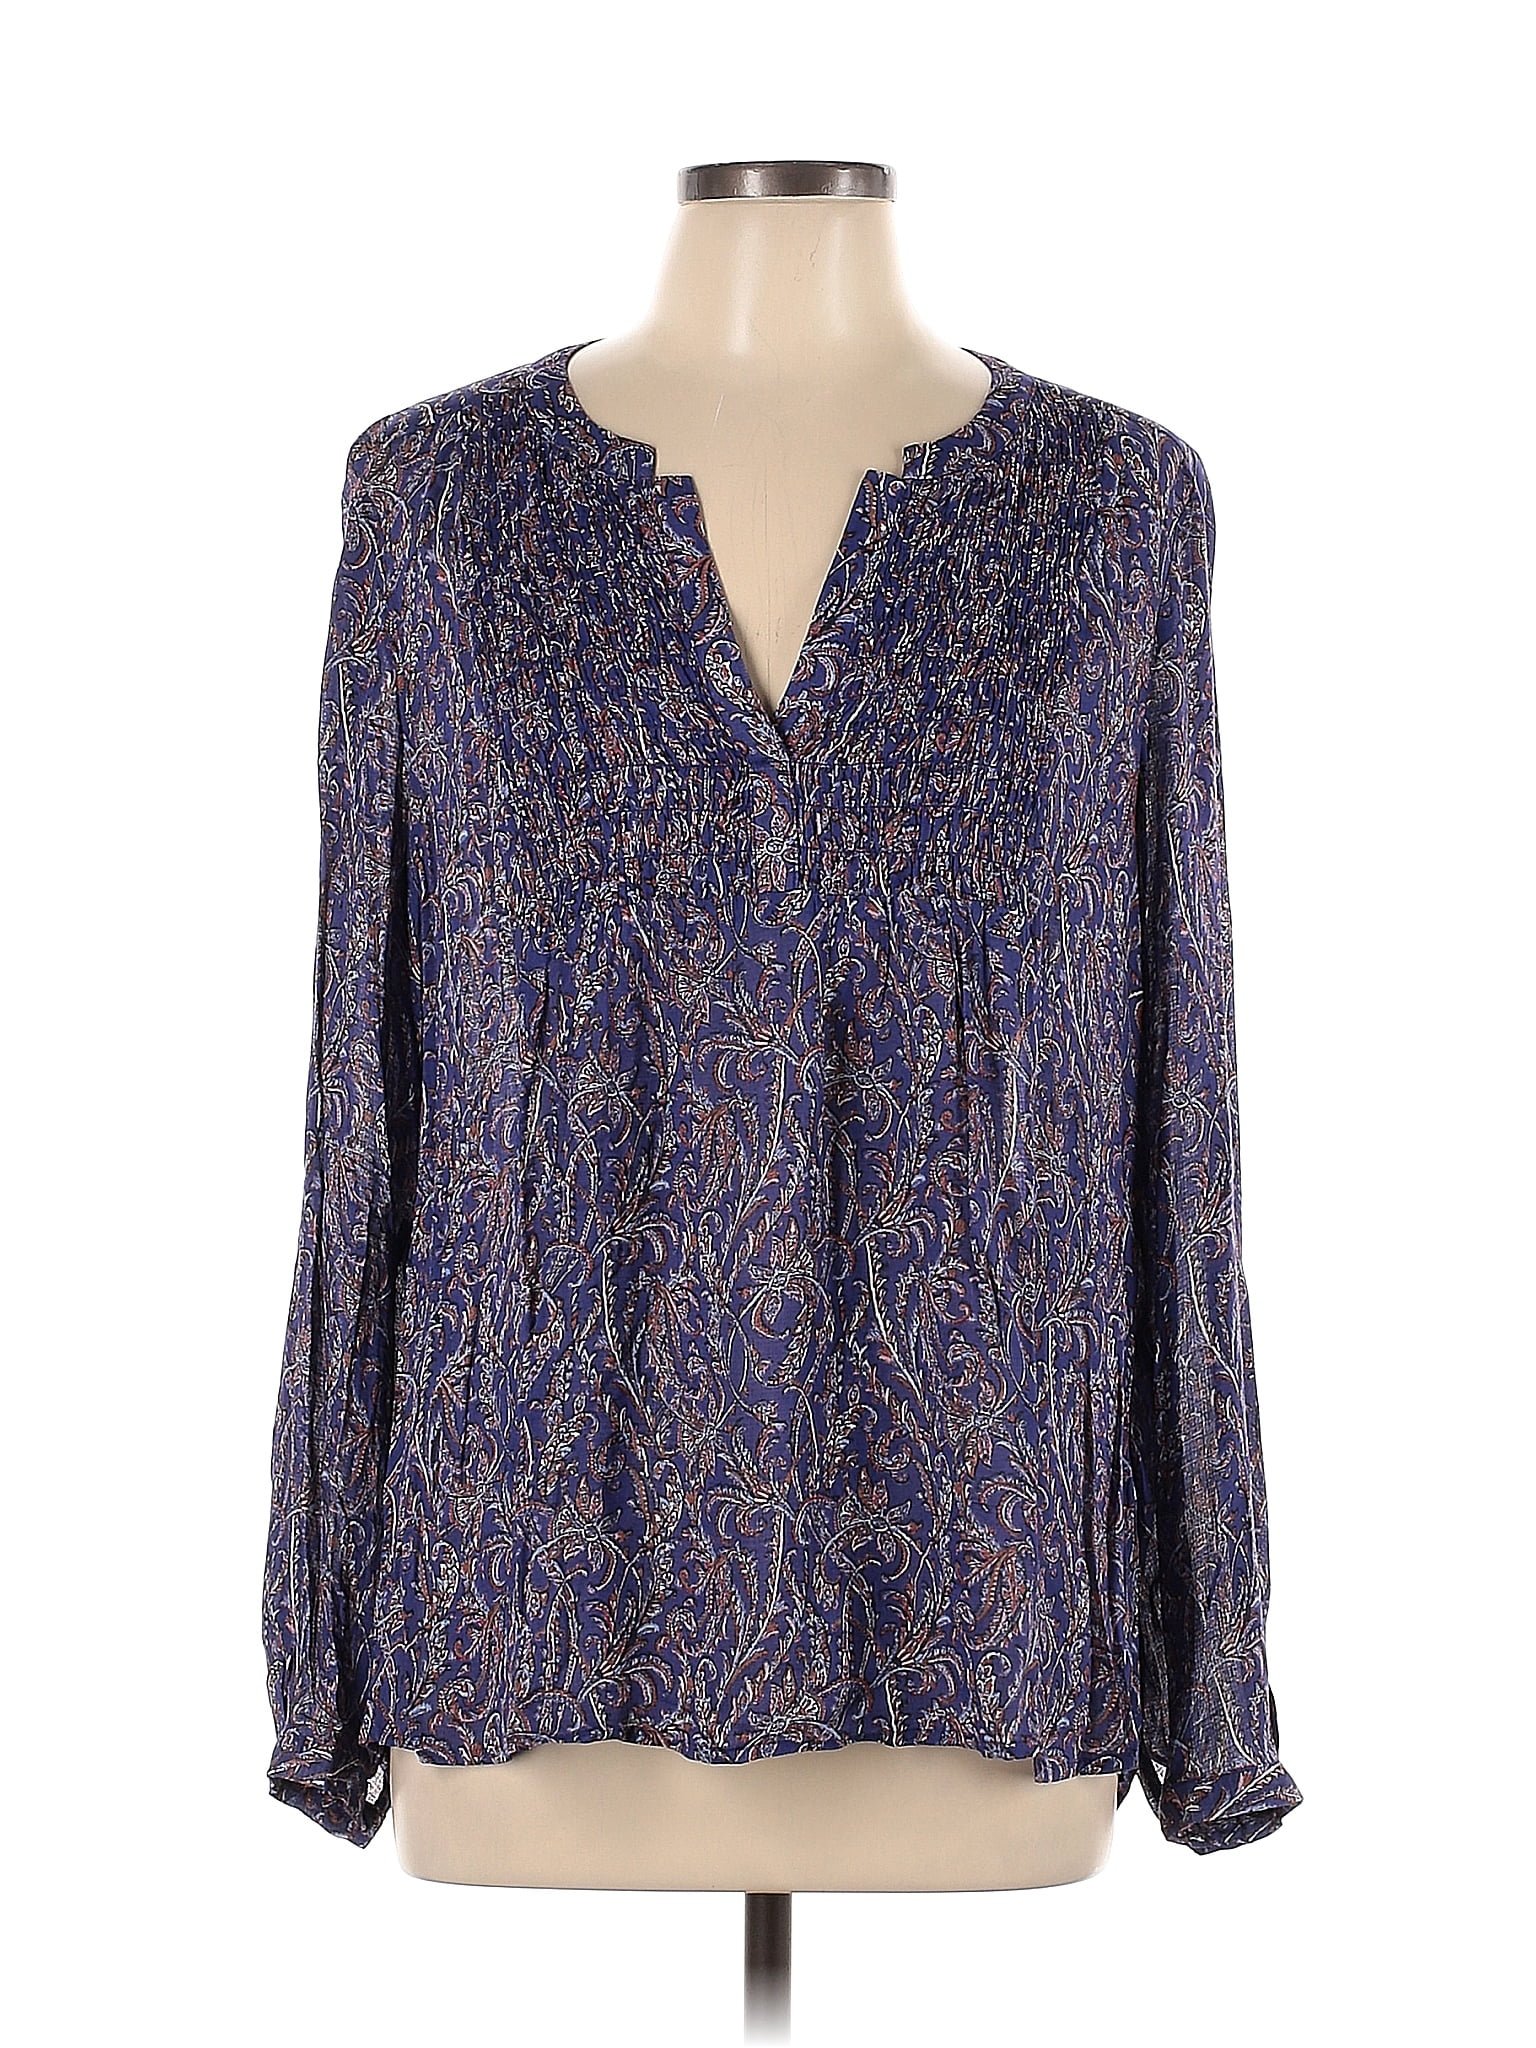 Lucky Brand 100% Viscose Paisley Multi Color Blue Sleeveless Blouse Size 3X  (Plus) - 55% off